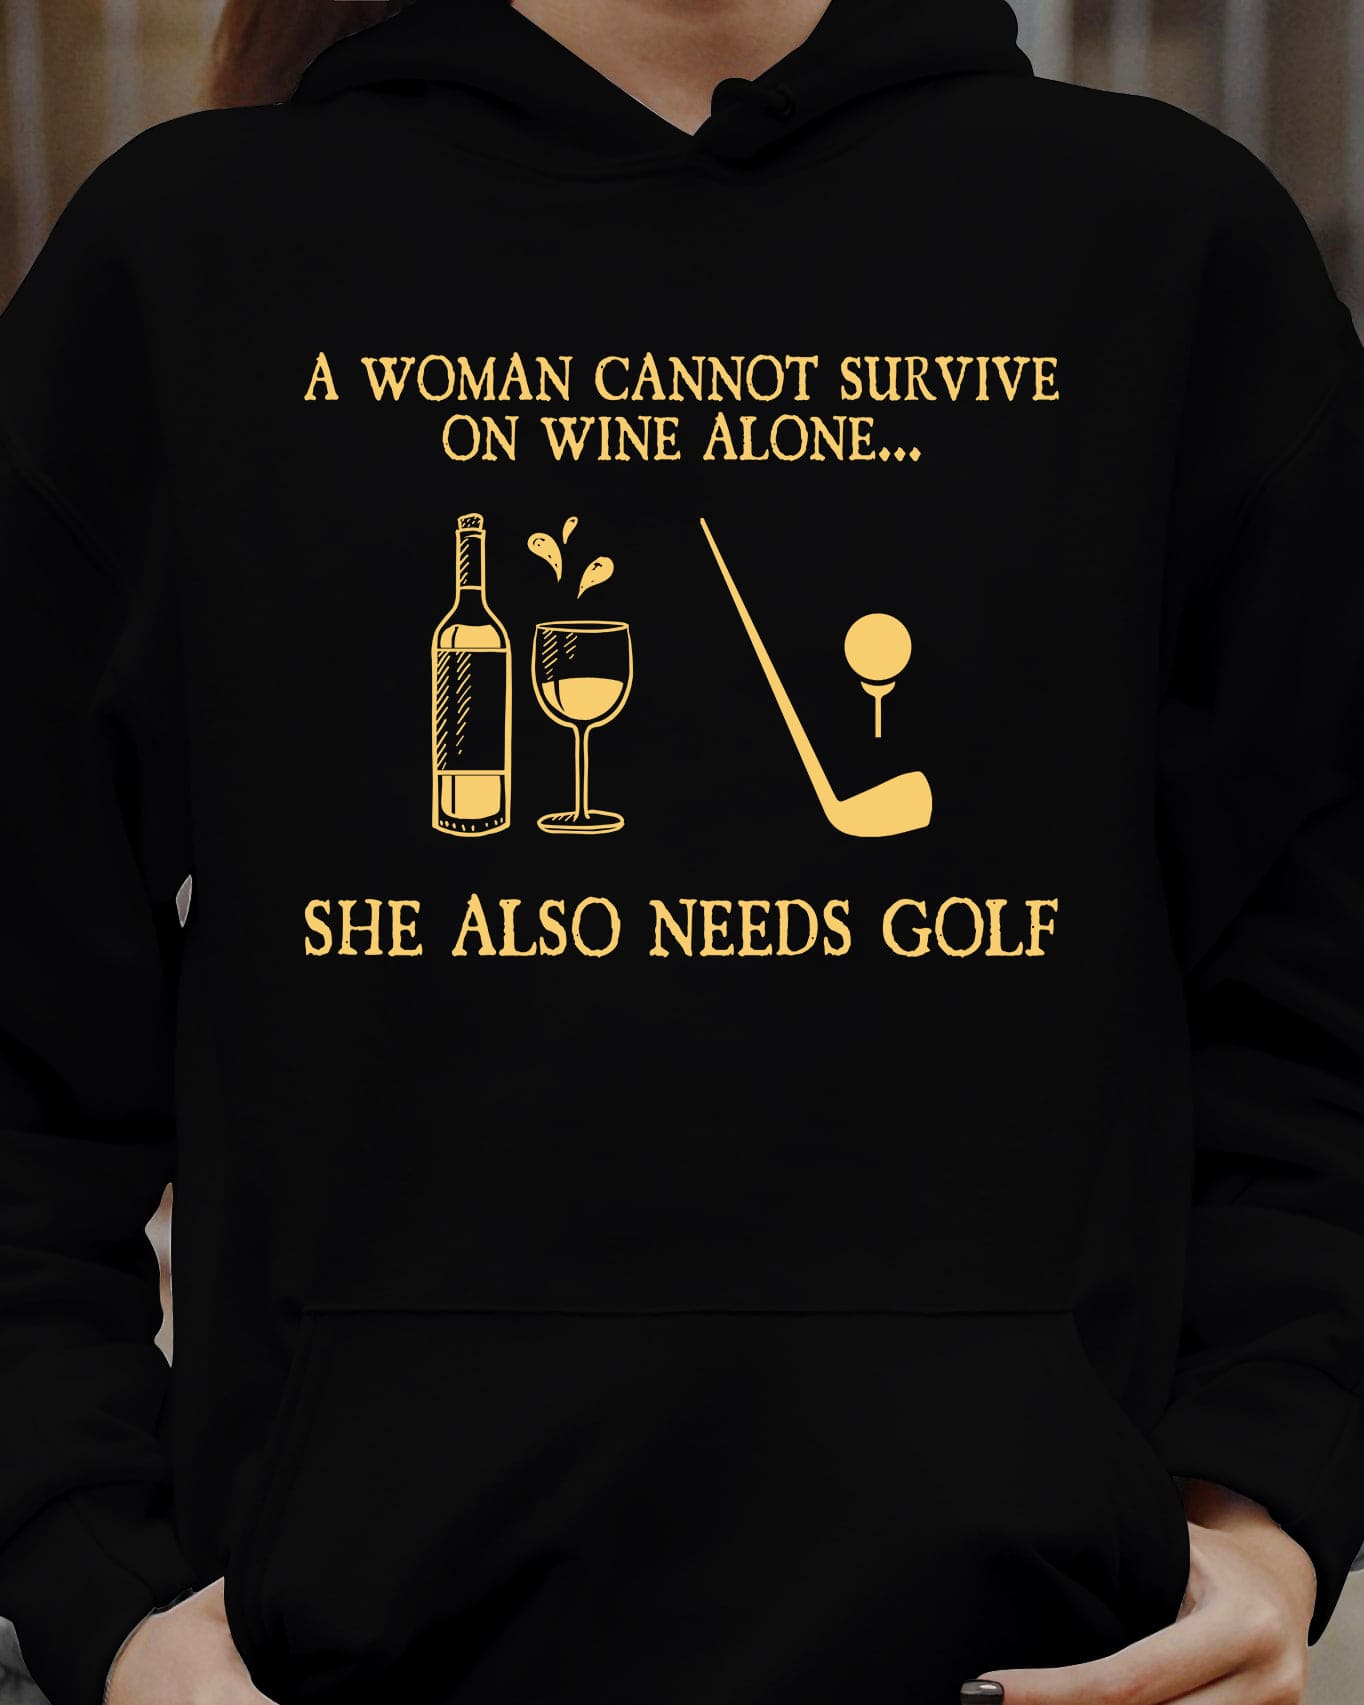 A woman cannot survive on wine alone, she also needs golf - Wine and golf, T-shirt for golfers